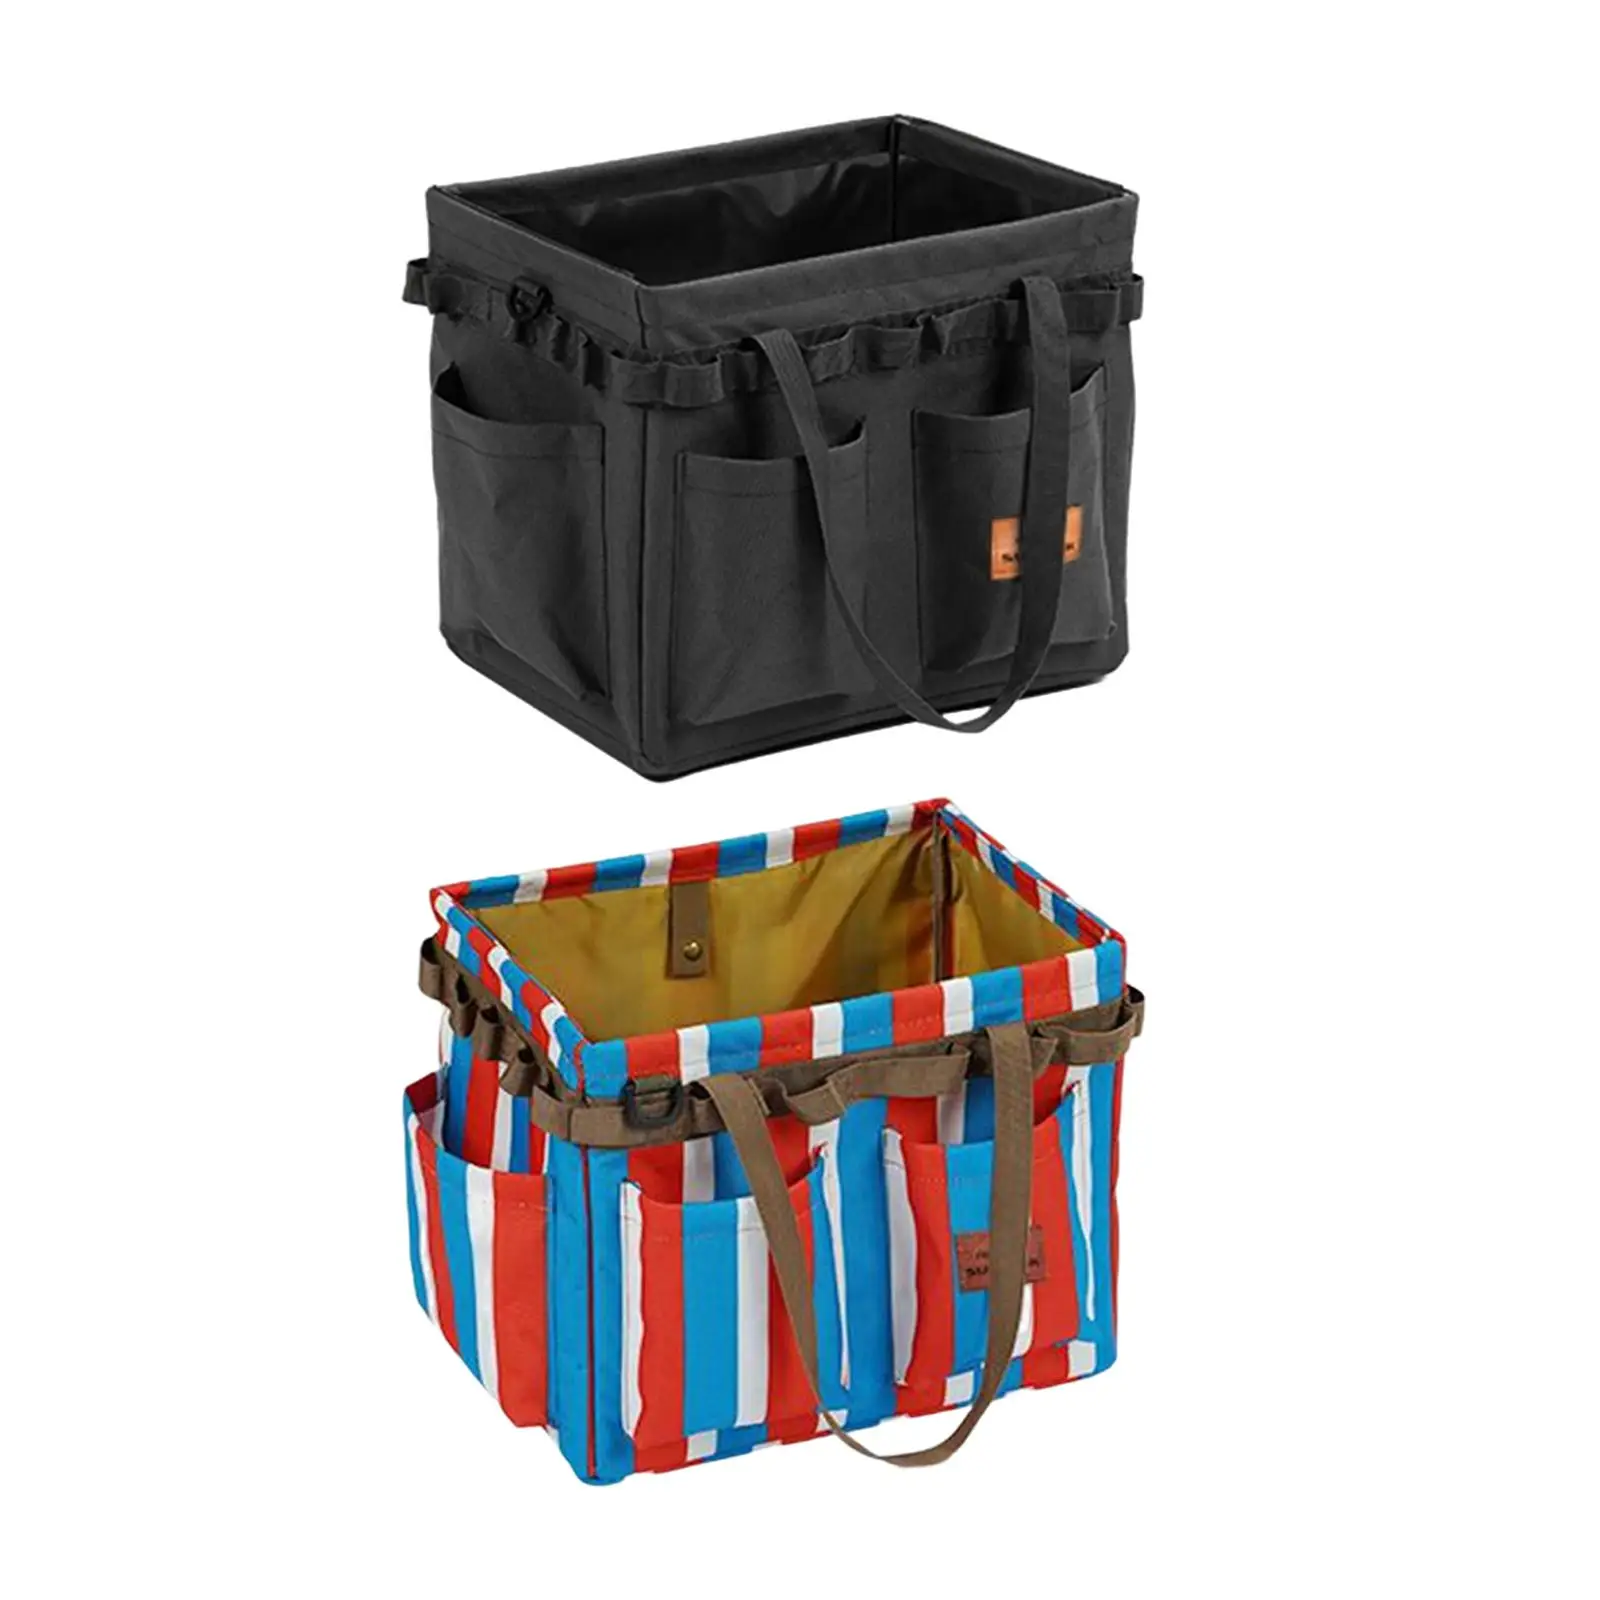 Reusable Utility Tote Tool Organizer Cooking Barbecue Camping Storage Bag